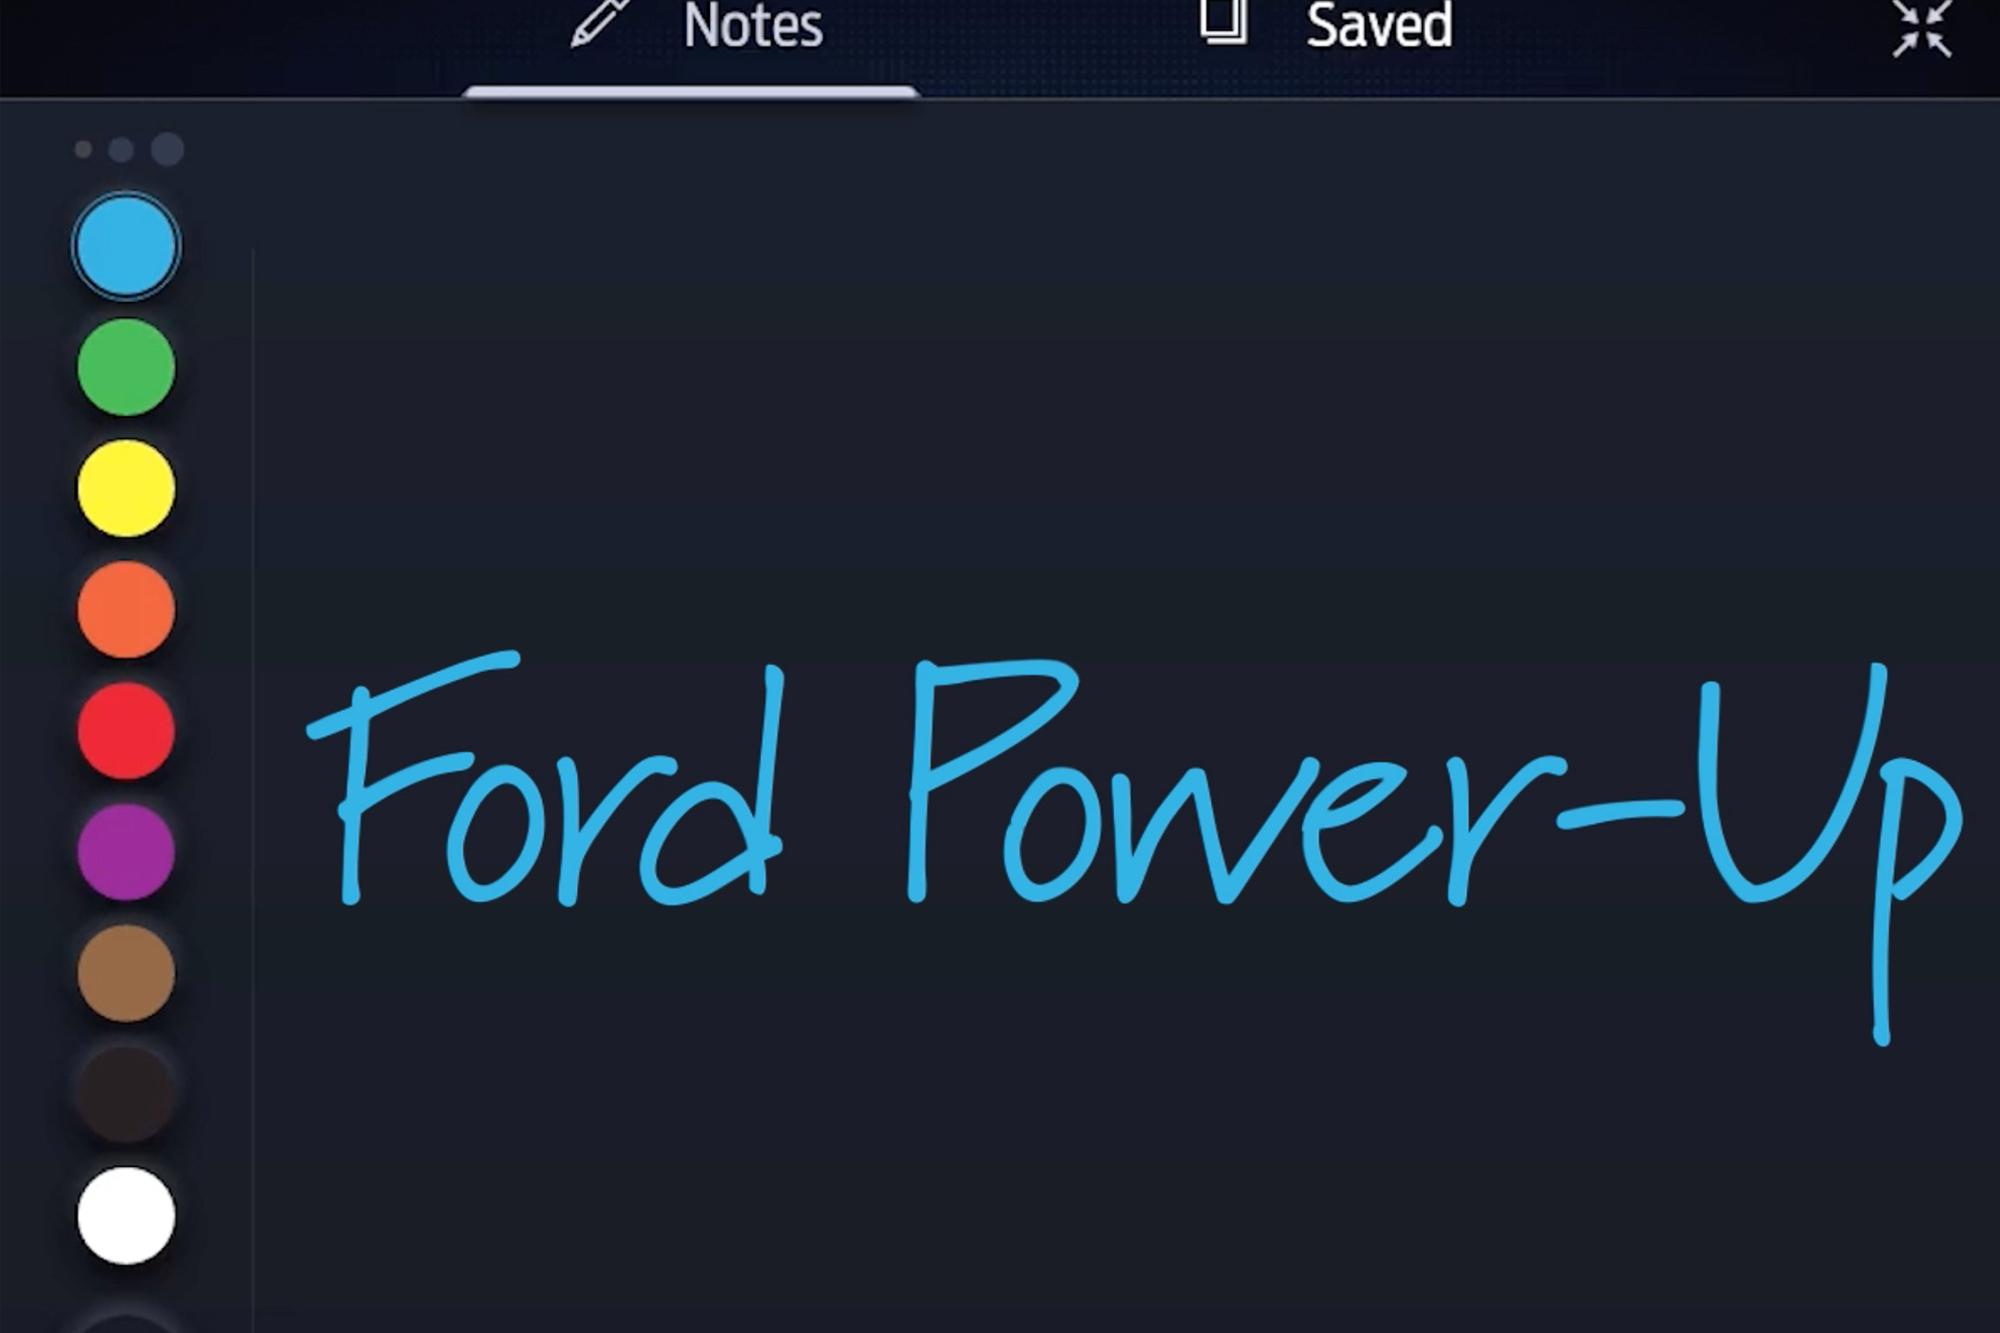 Ford Power Up